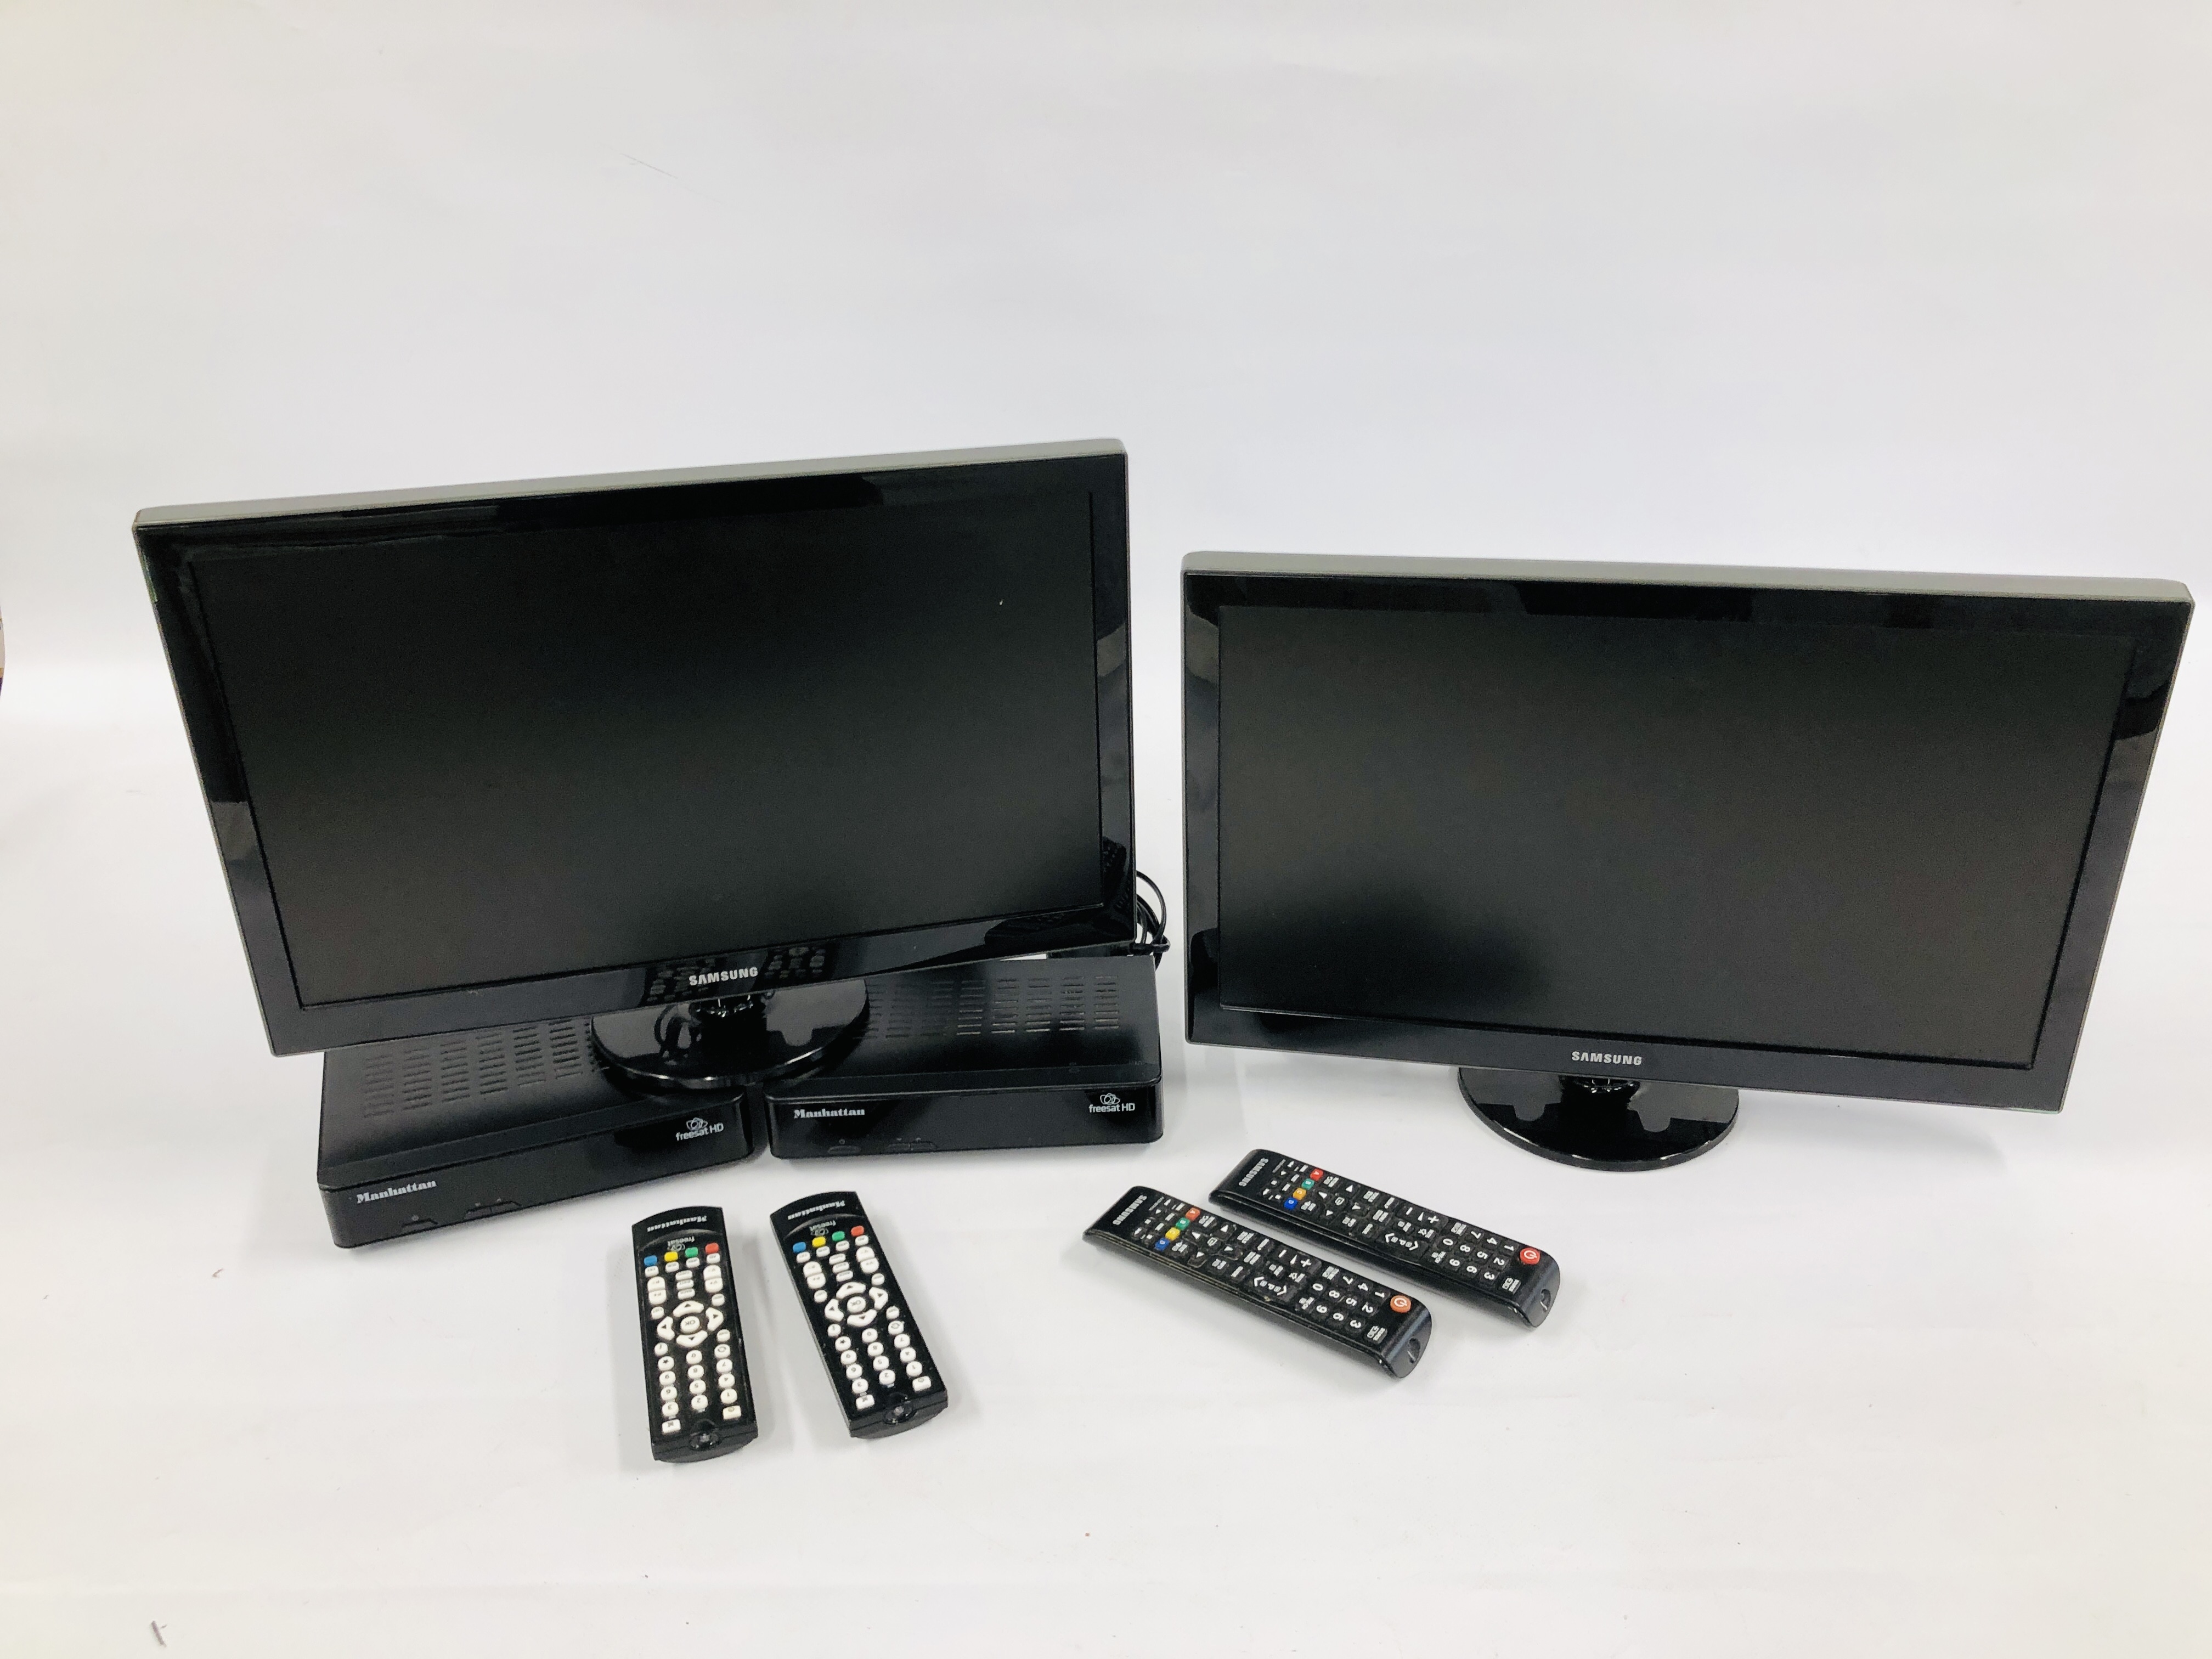 TWO SAMSUNG 19 INCH TELEVISIONS MODEL UE19F4000AW AND REMOTES ALONG WITH TWO MANHATTAN FREESAT